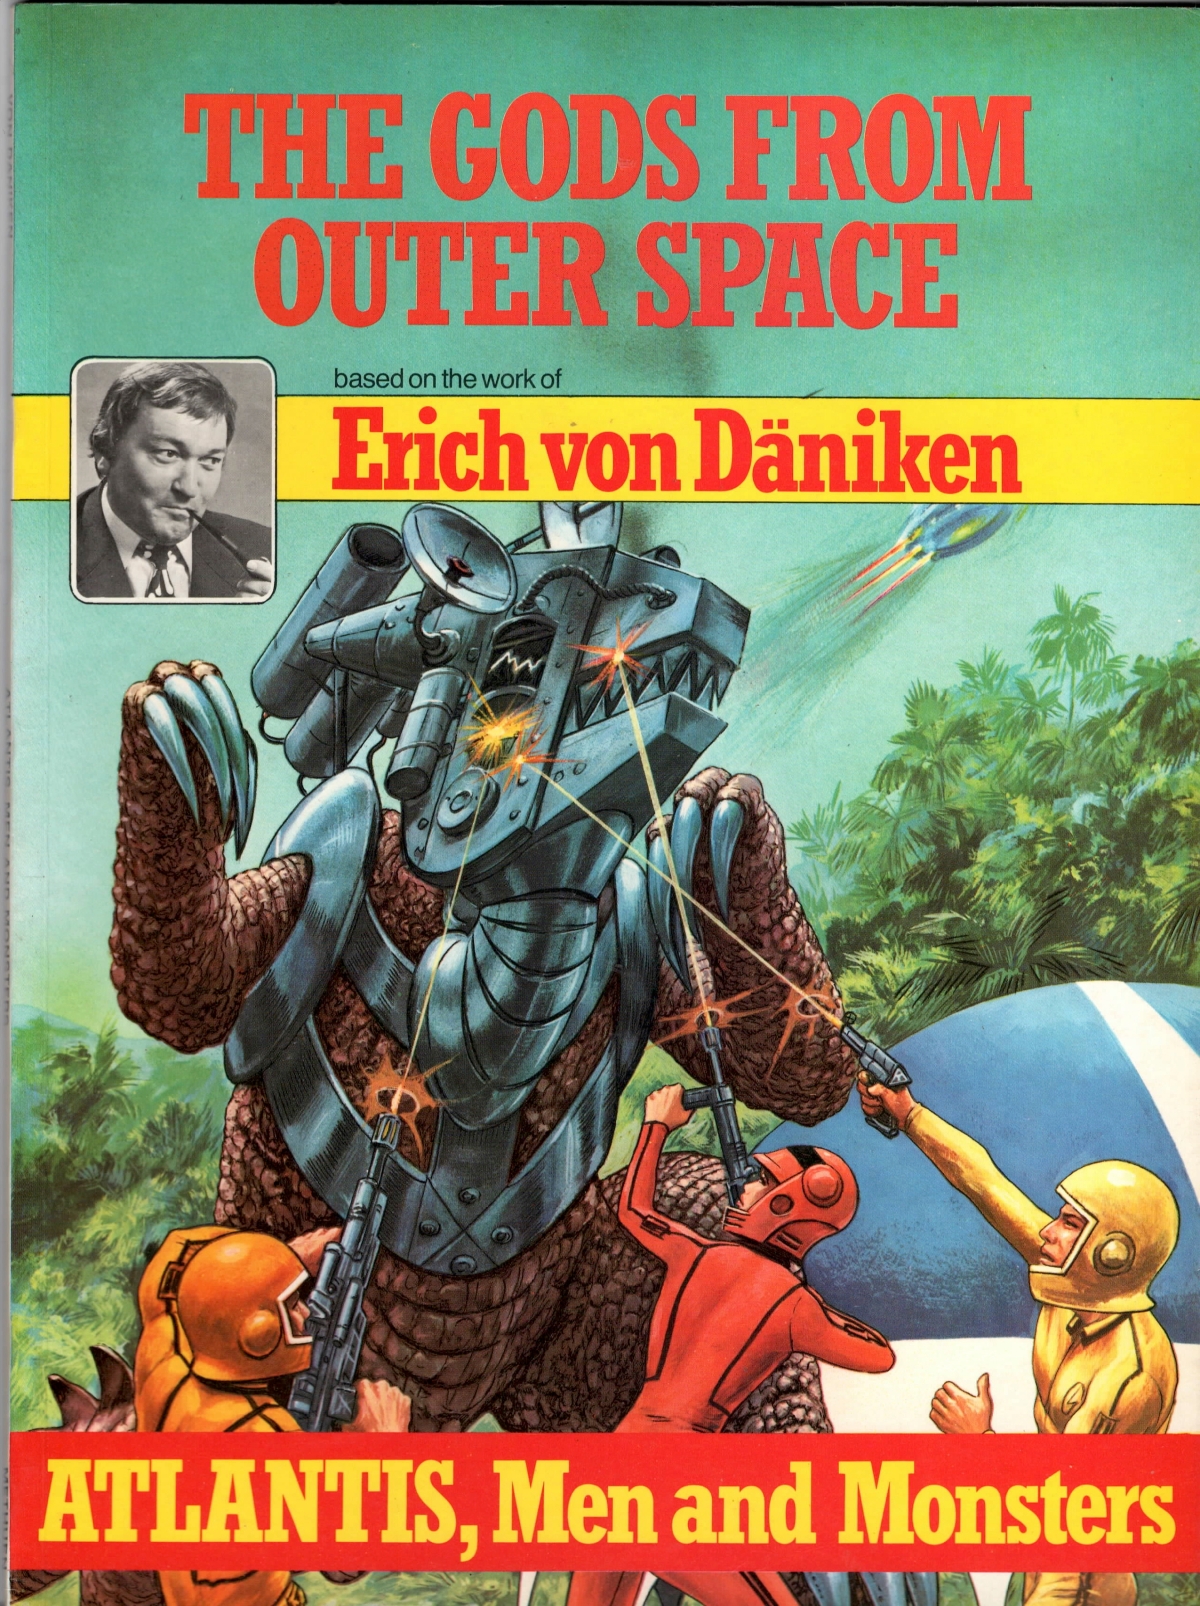 erich-von-daniken-gods-from-outer-space-cover-we-are-the-mutants-4.jpg